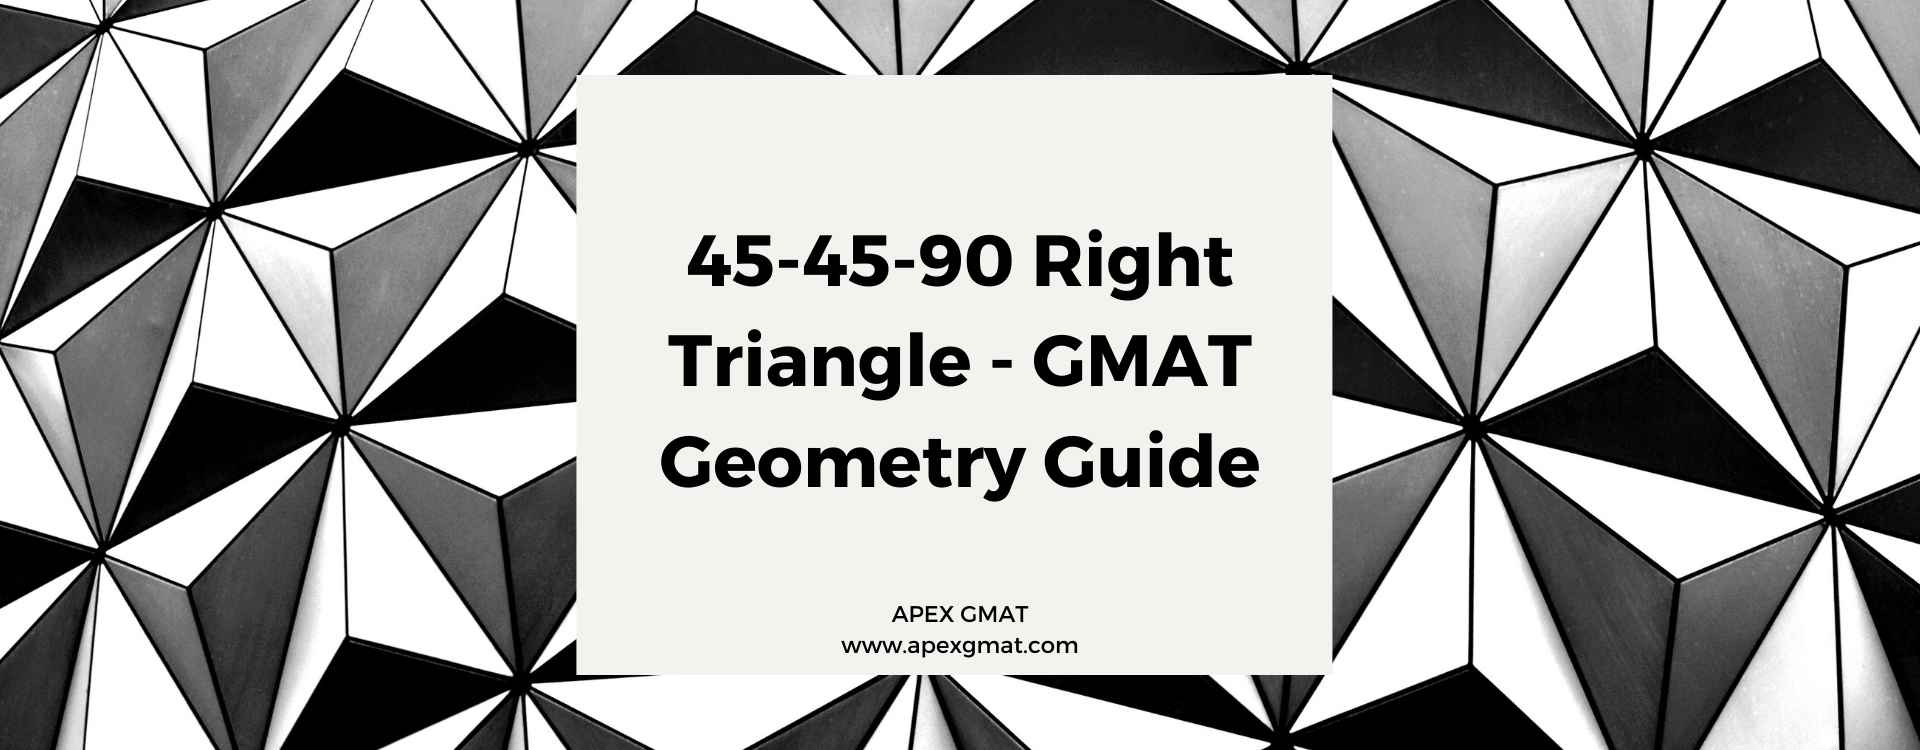 45-45-90 Right Triangle – GMAT Geometry Guide